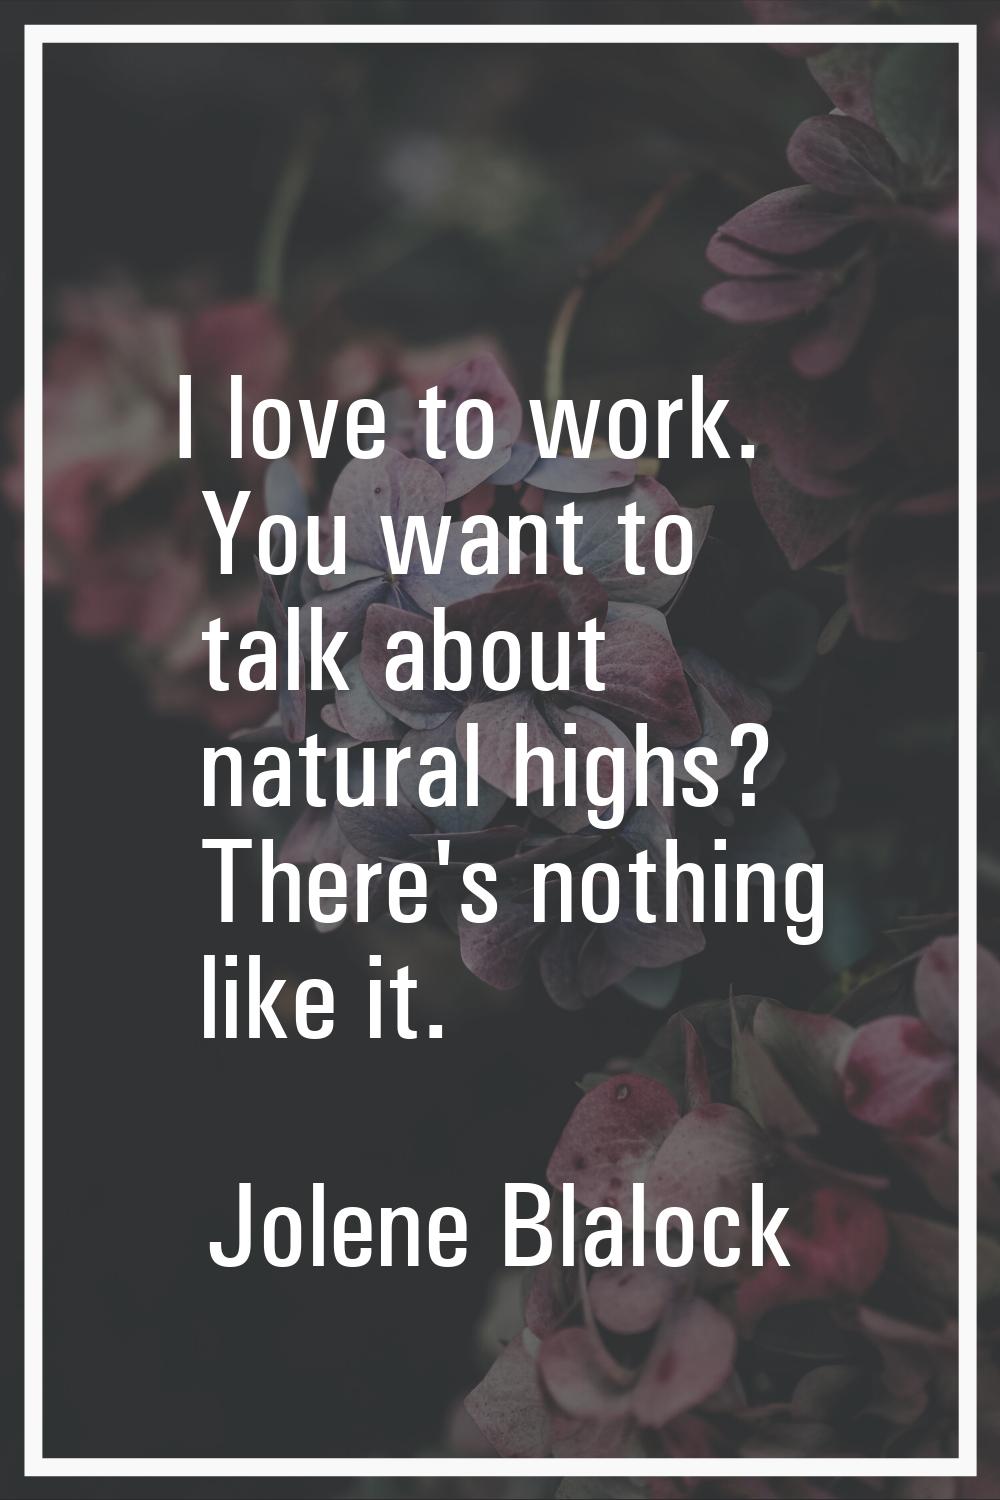 I love to work. You want to talk about natural highs? There's nothing like it.